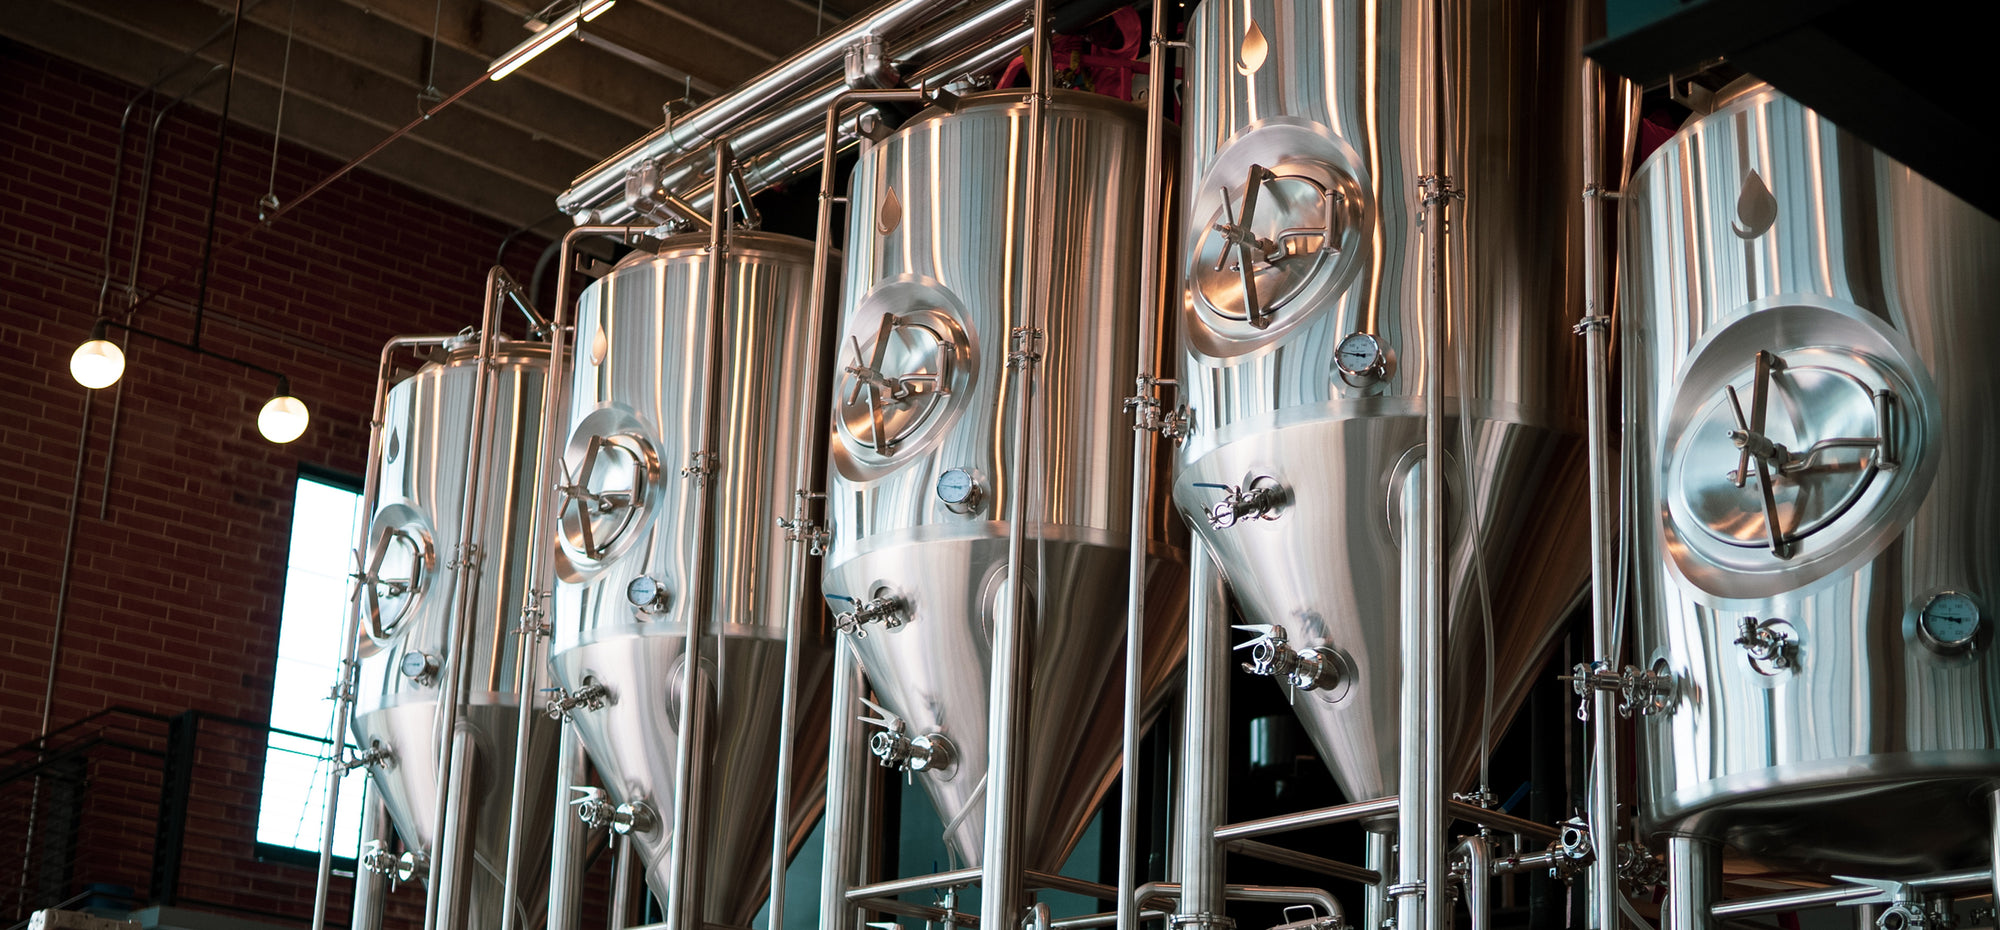 See DBT Parts in action. This array of fermenting tanks utilizes many of our parts of fermenter like 1.5" Tri-clamp temperature gauges, tri-clamp butterfly valves, 1.5" tc perlick valves, and manway gaskets. Shop more commercial brewing equipment and cellar hardware.